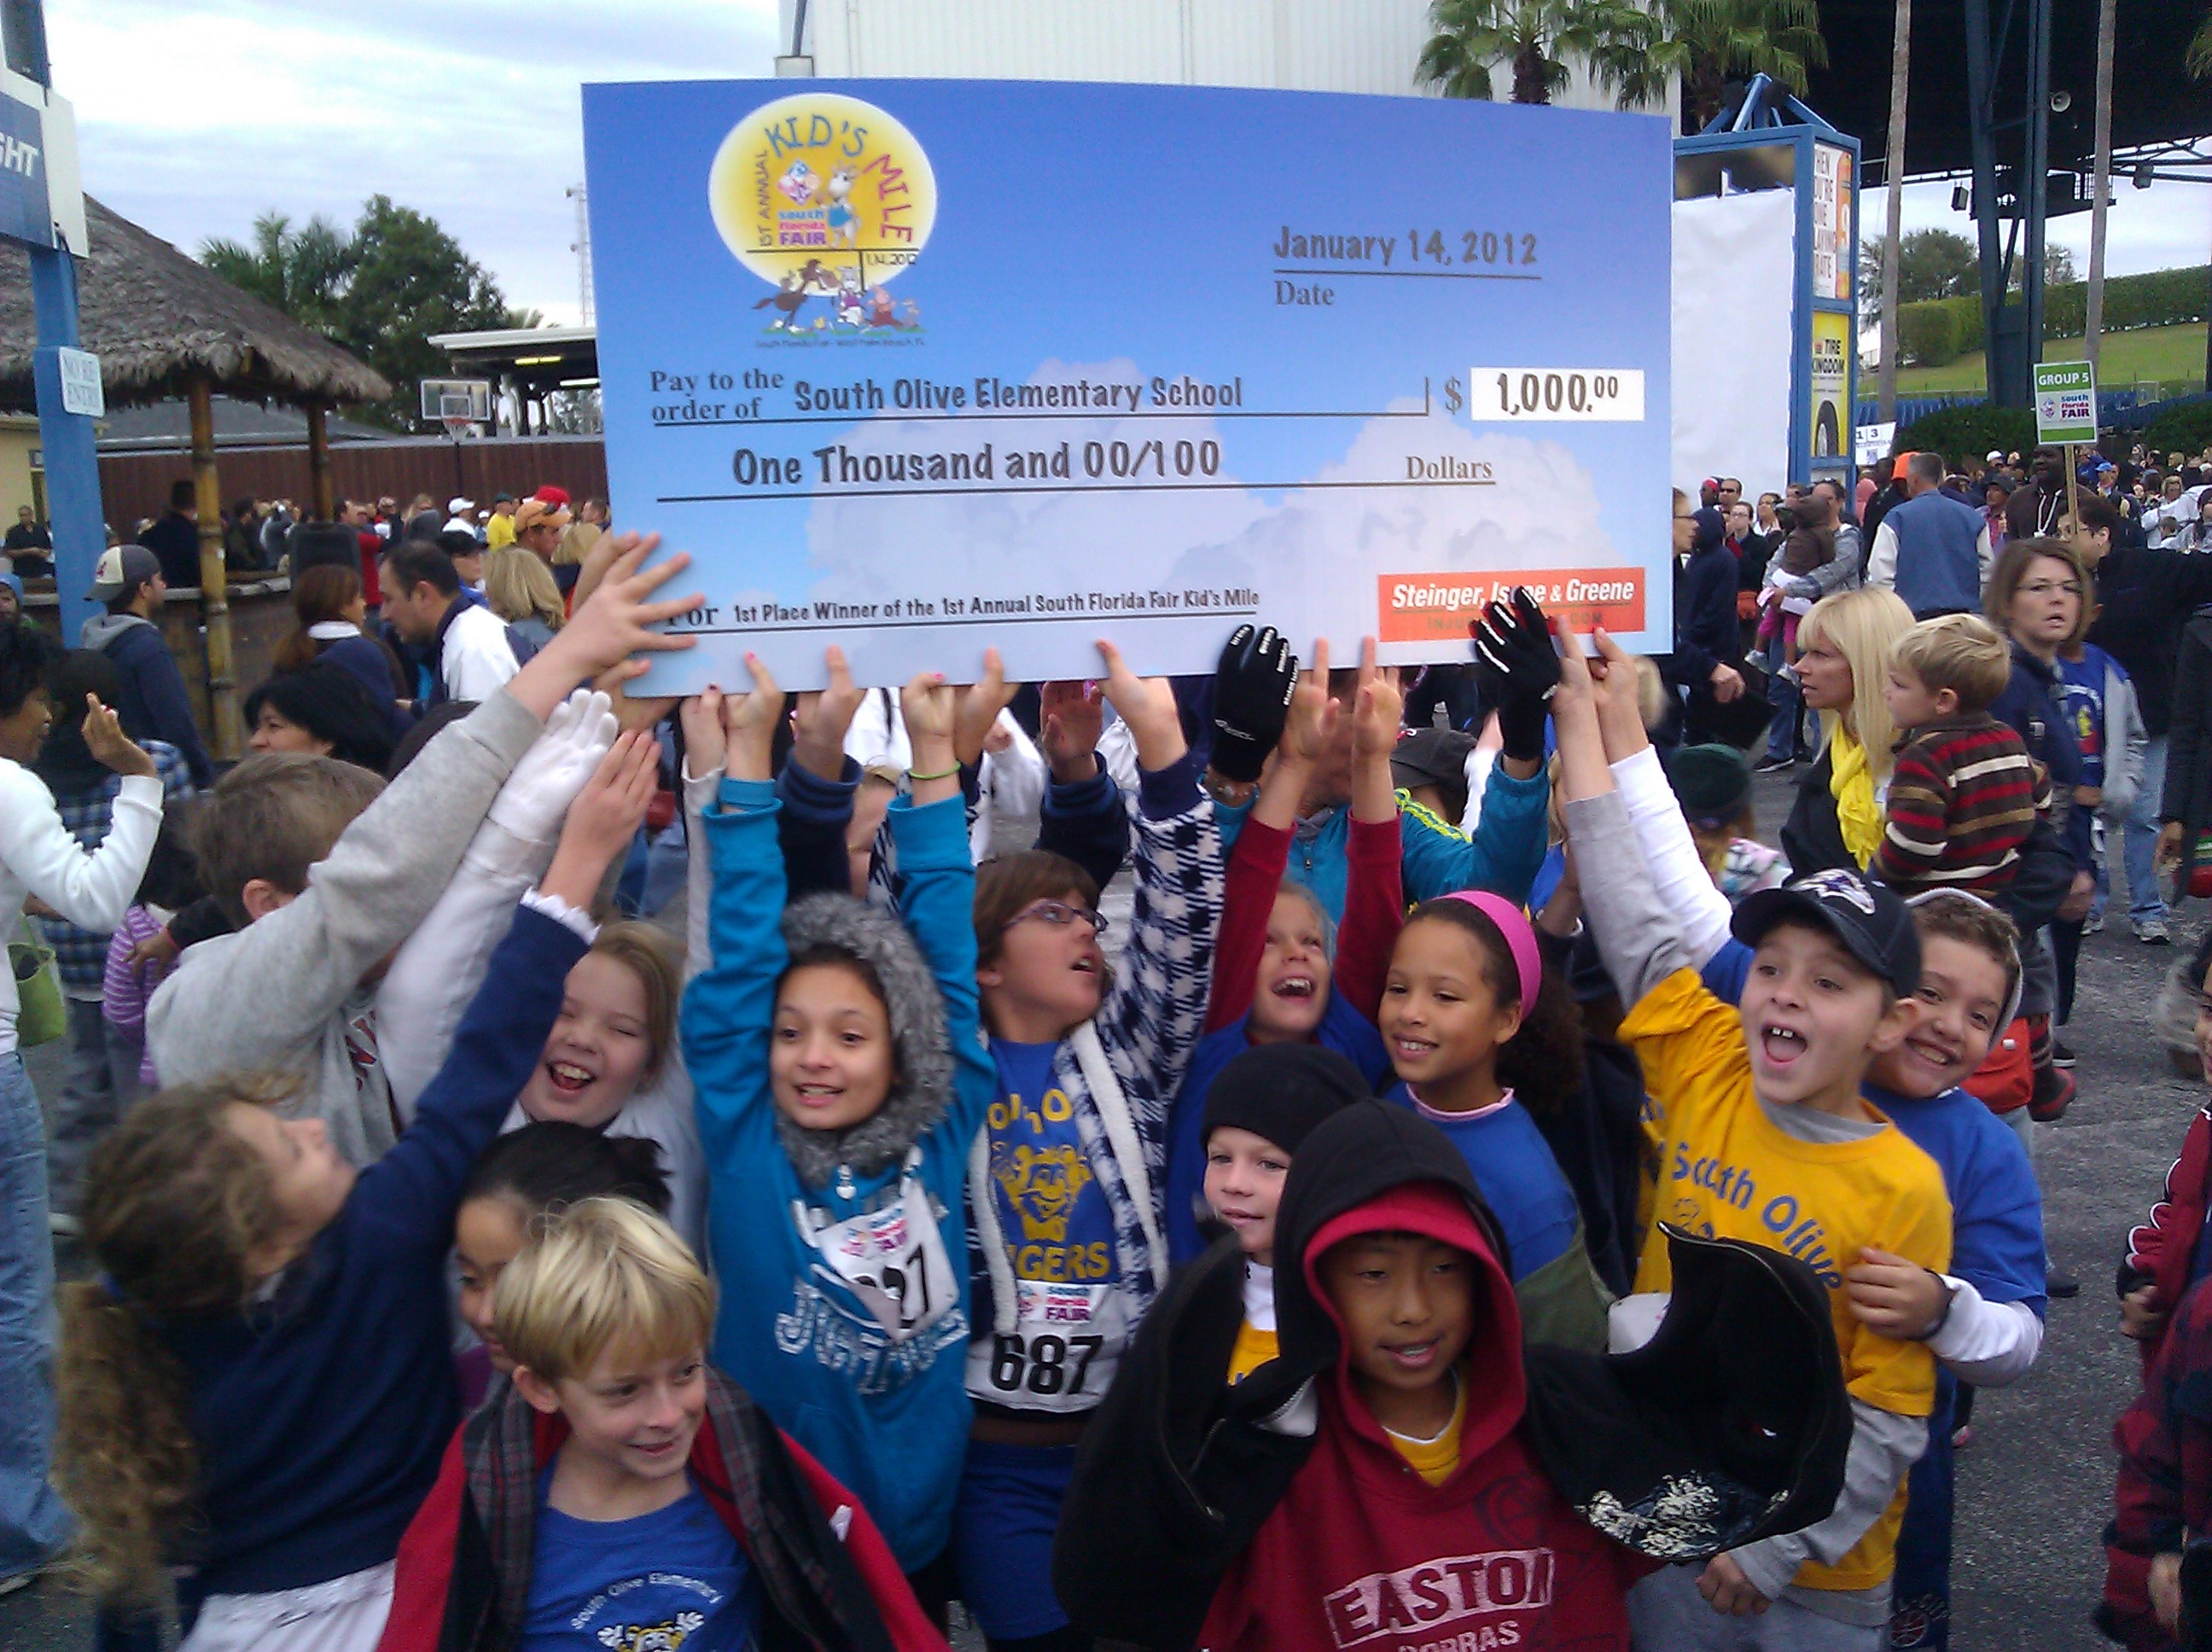 South Olive School WINS $1000 for largest participation in South Florida Fair's mile race.